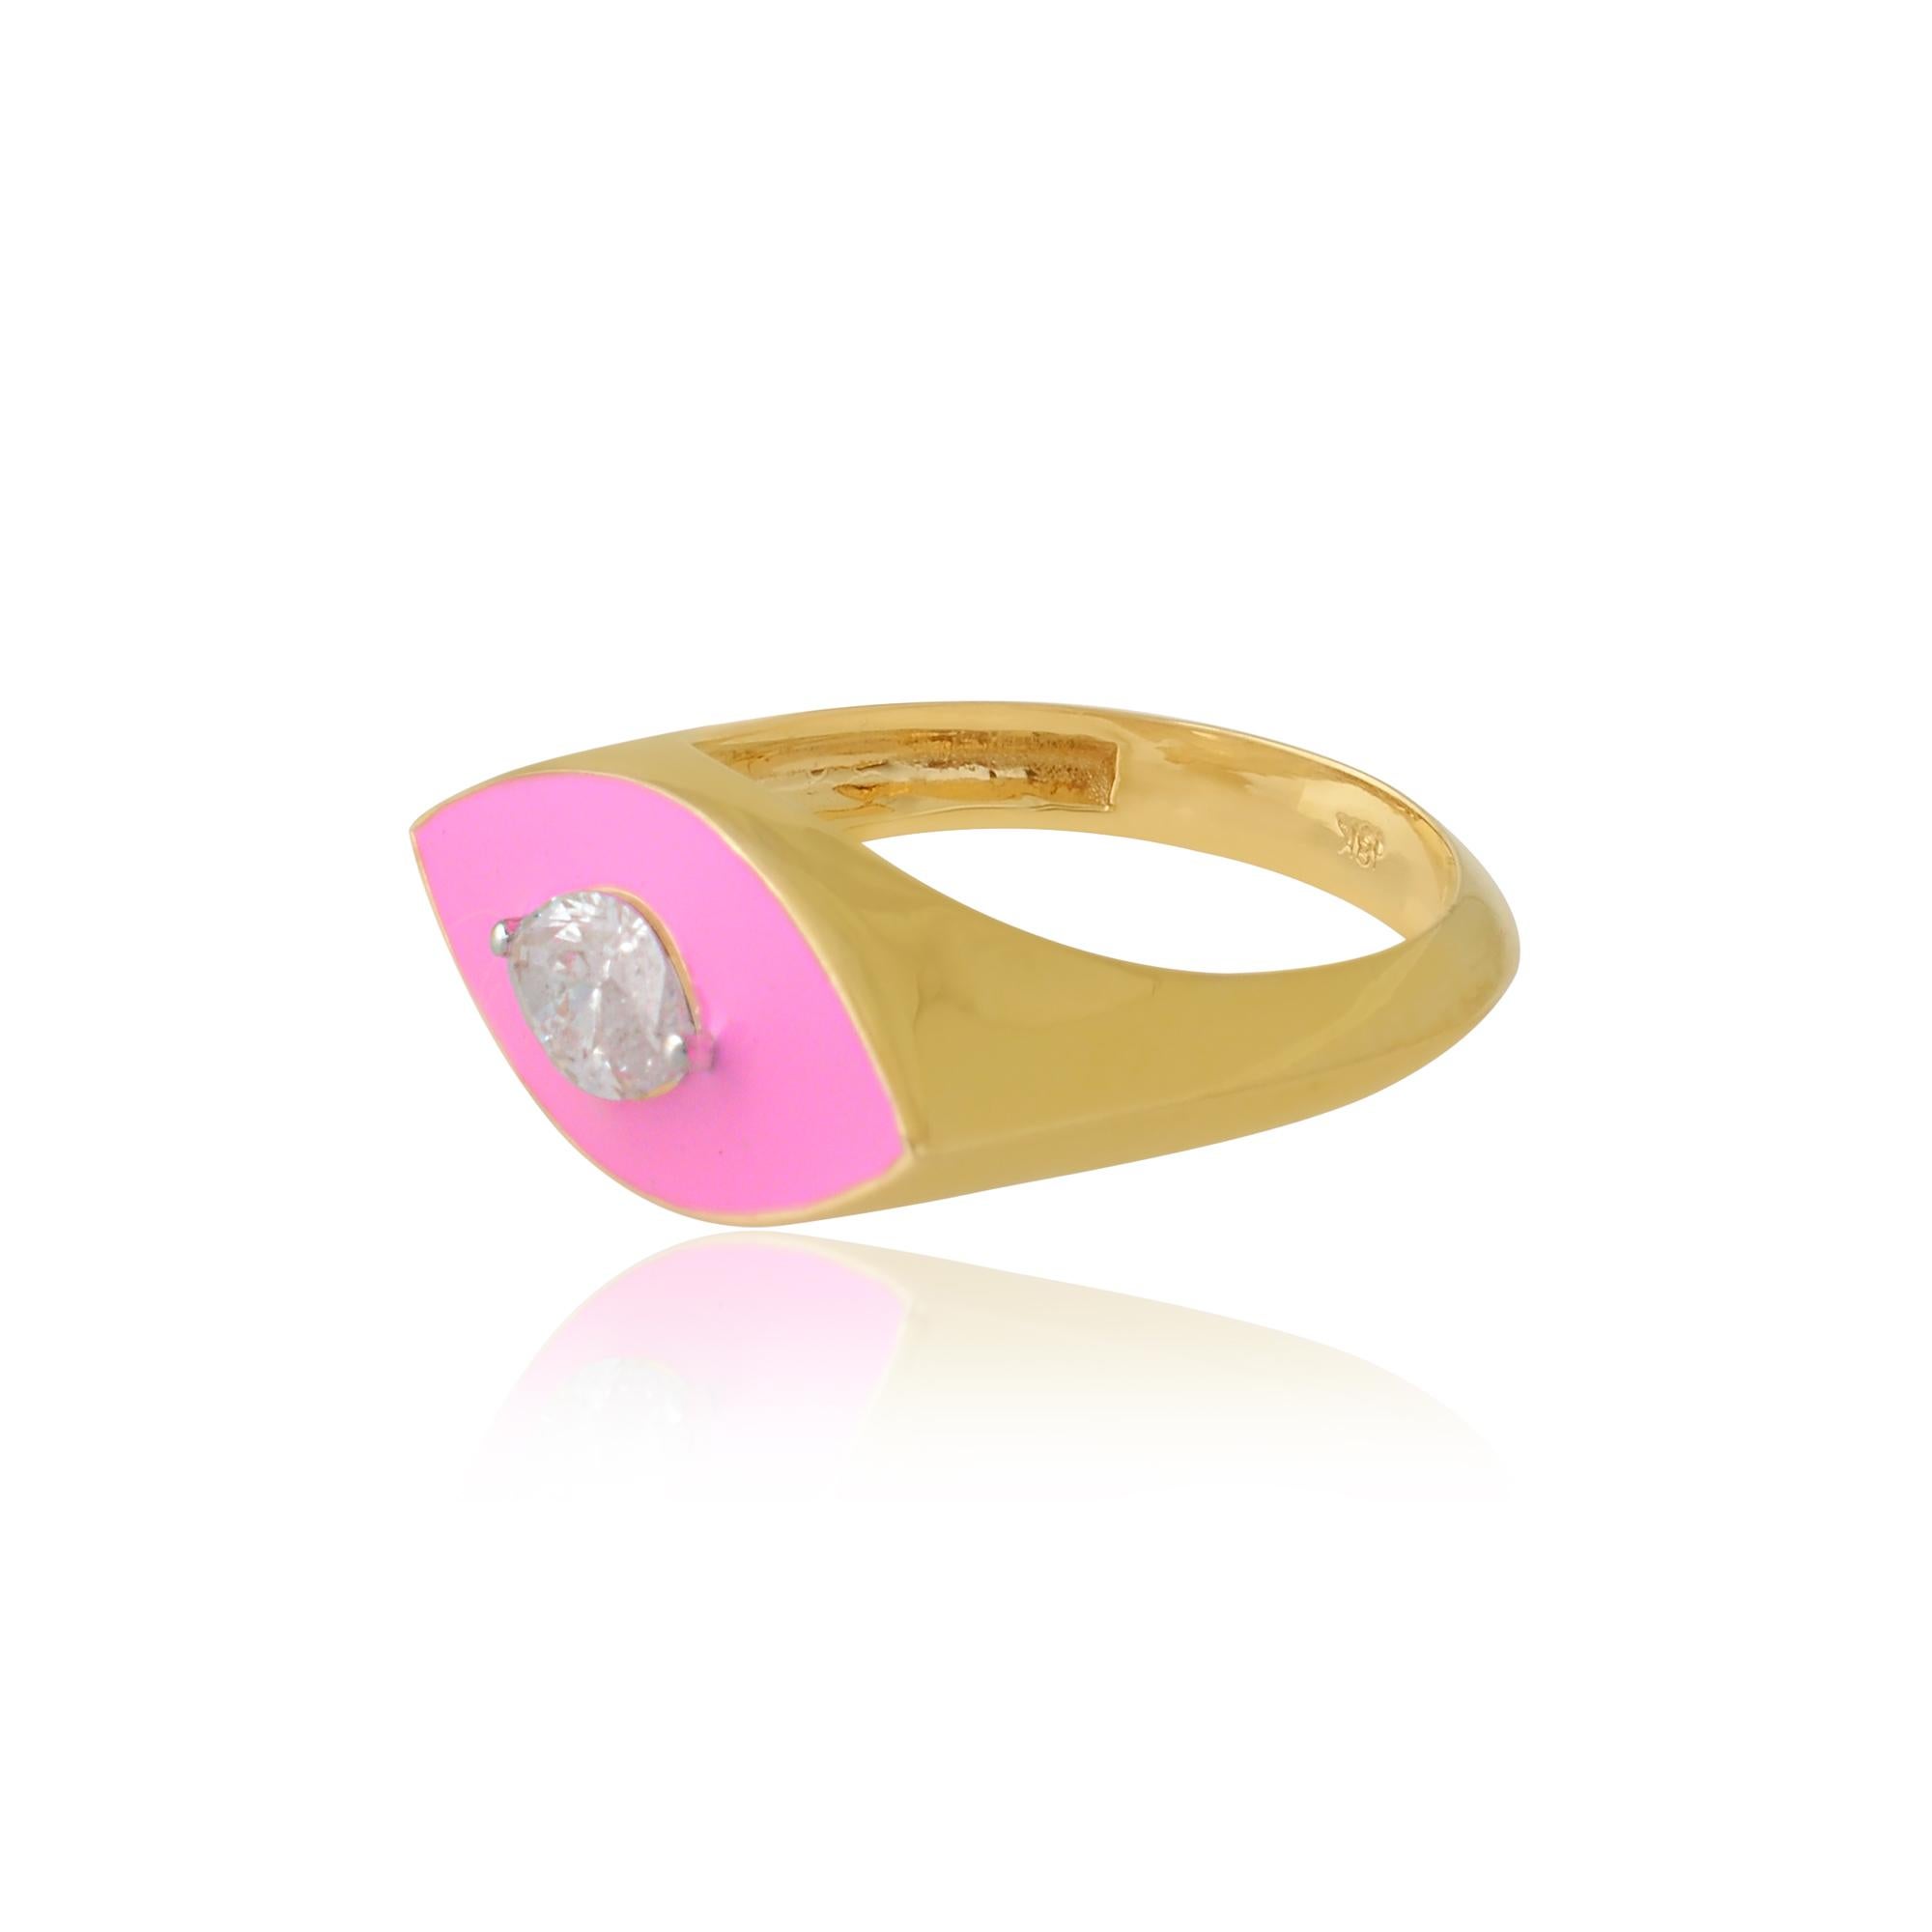 0.38 Carat Solitaire Diamond Evil Eye Ring 14k Yellow Gold Pink Enamel Jewelry For Sale 2